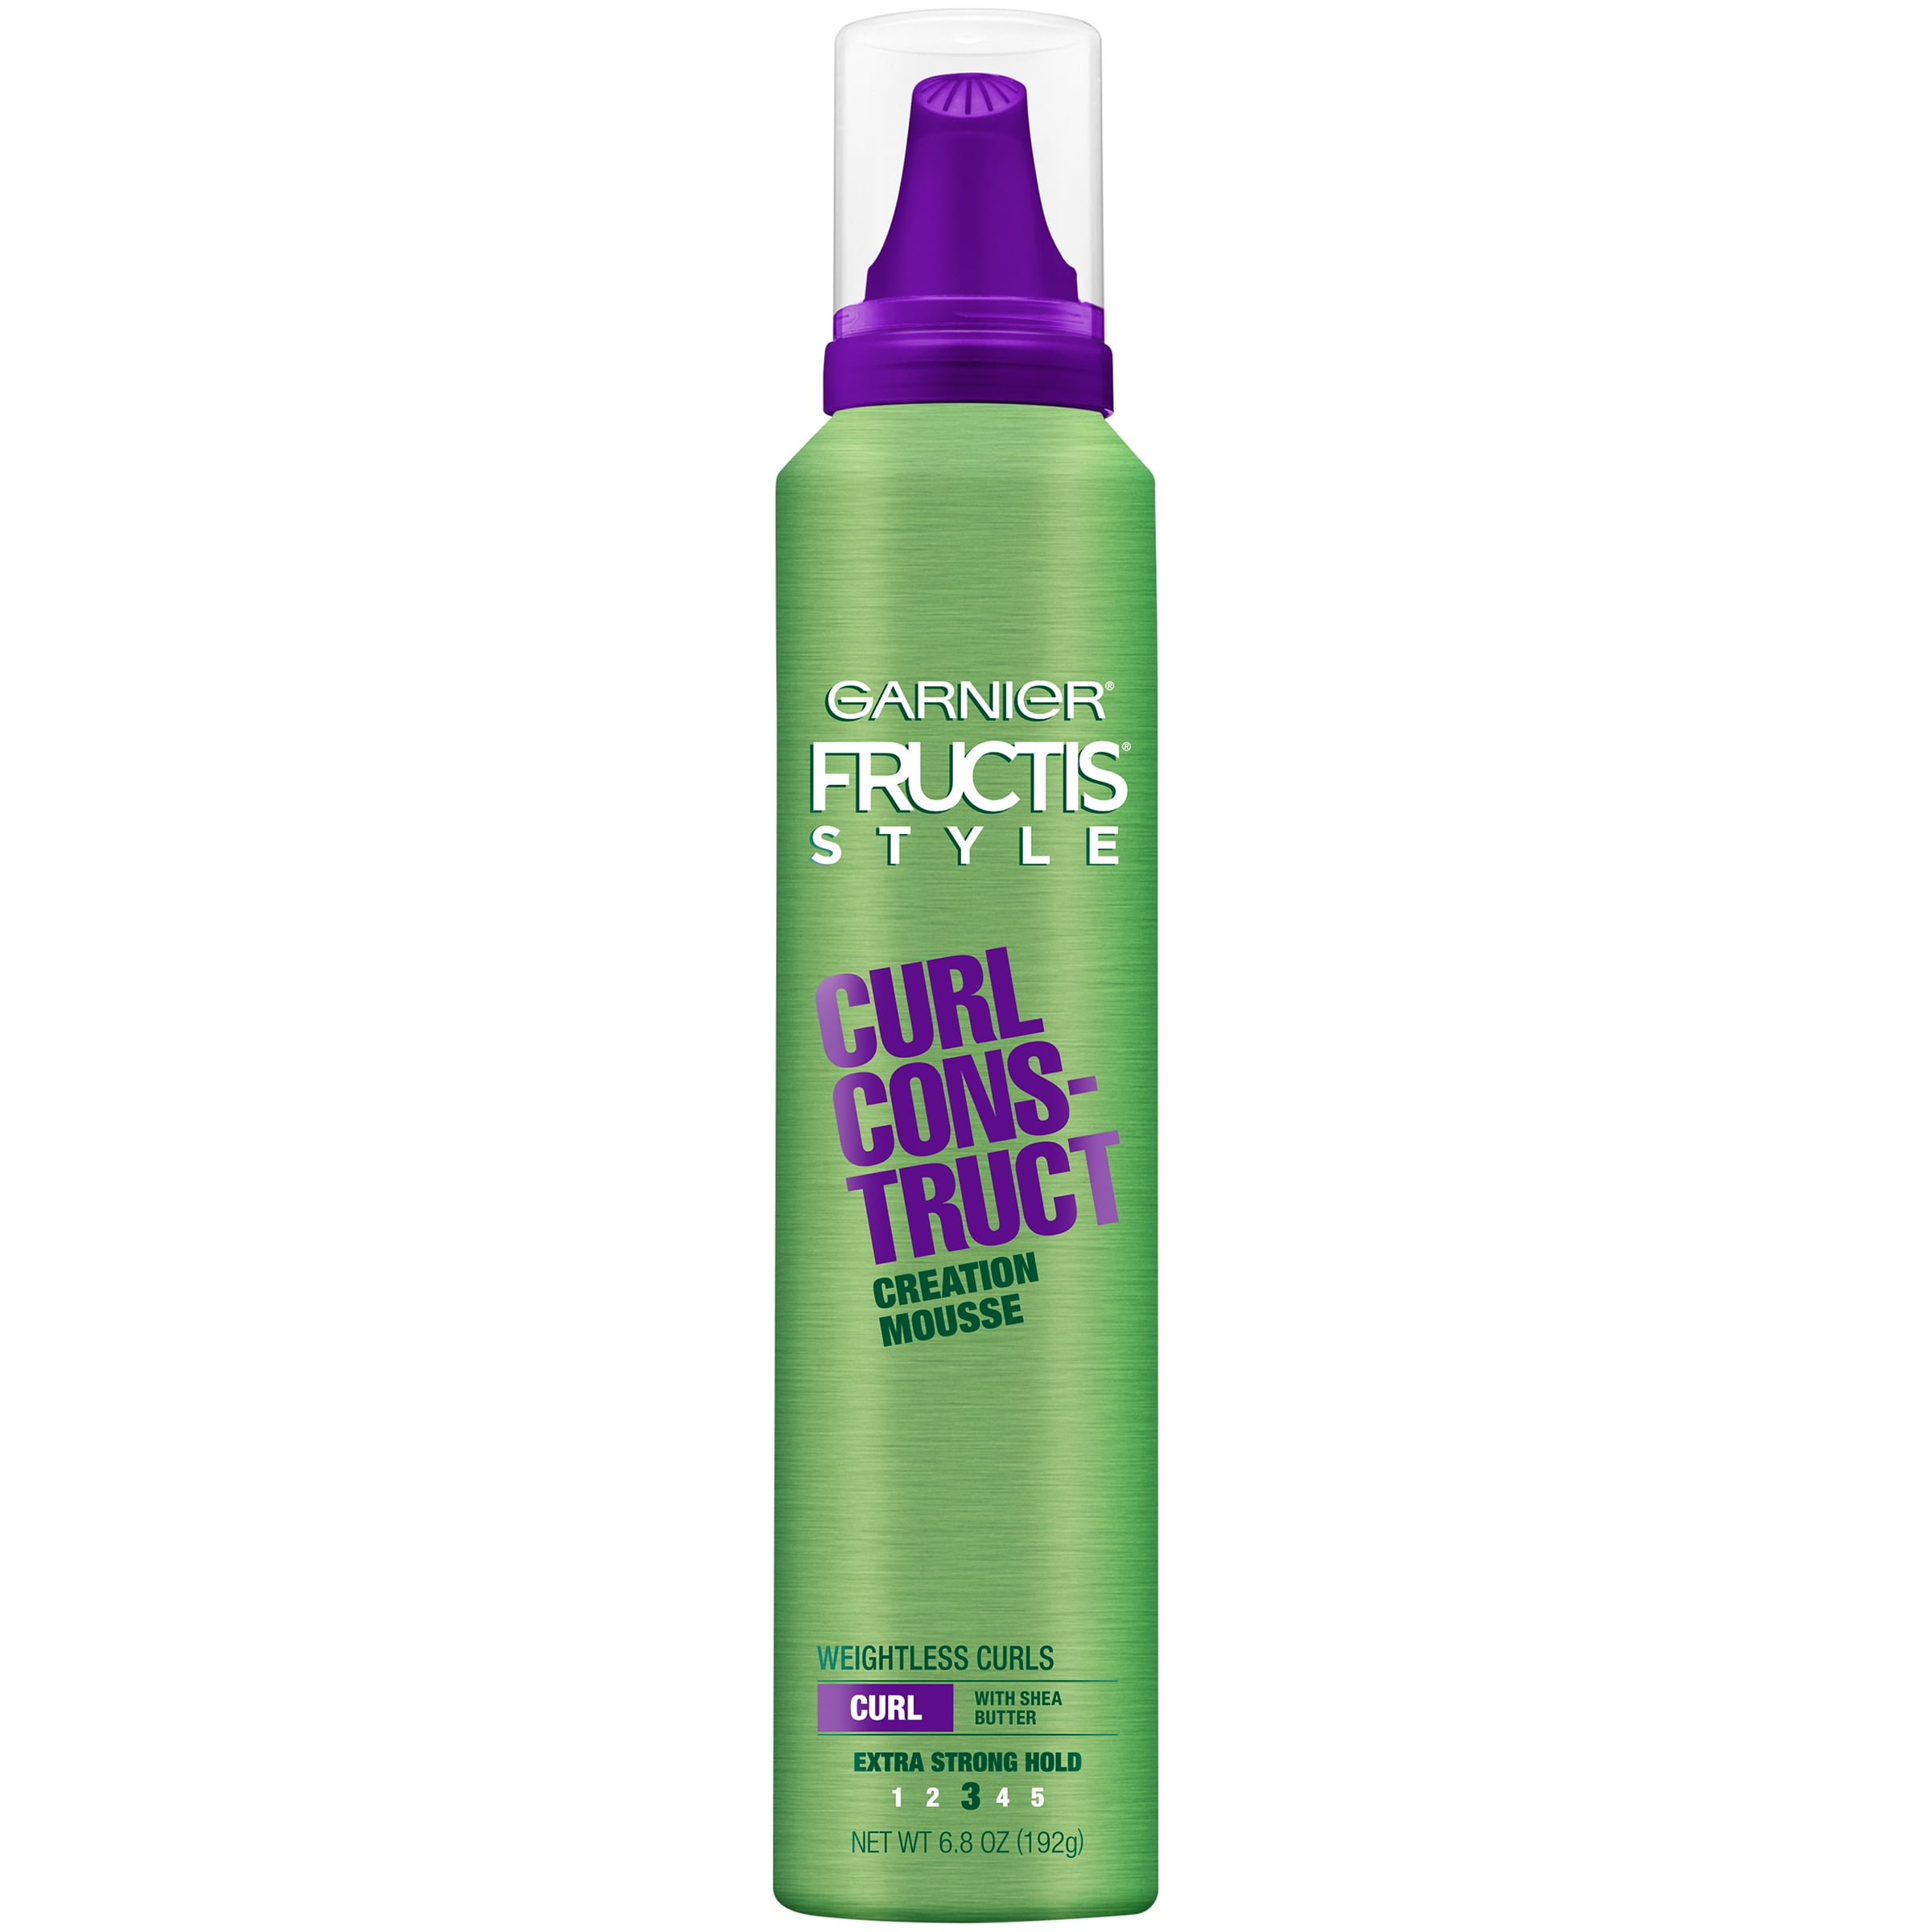 garnier-fructis-style-curl-construct-creation-mousse-for-curly-hair-6